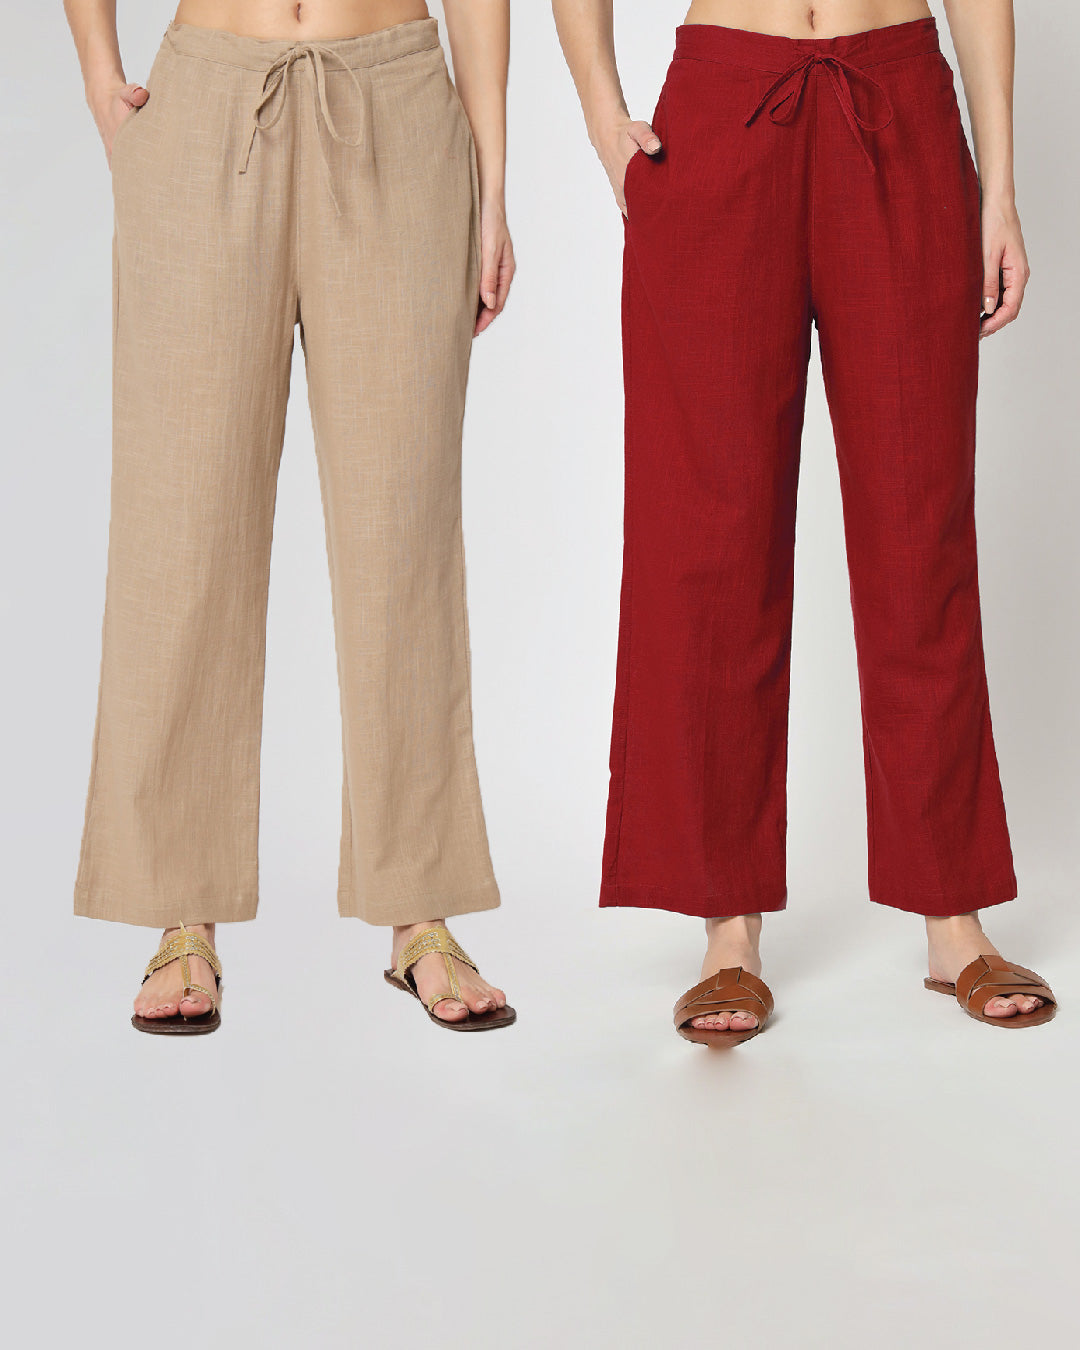 Combo: Beige & Classic Red Straight Pants- Set of 2